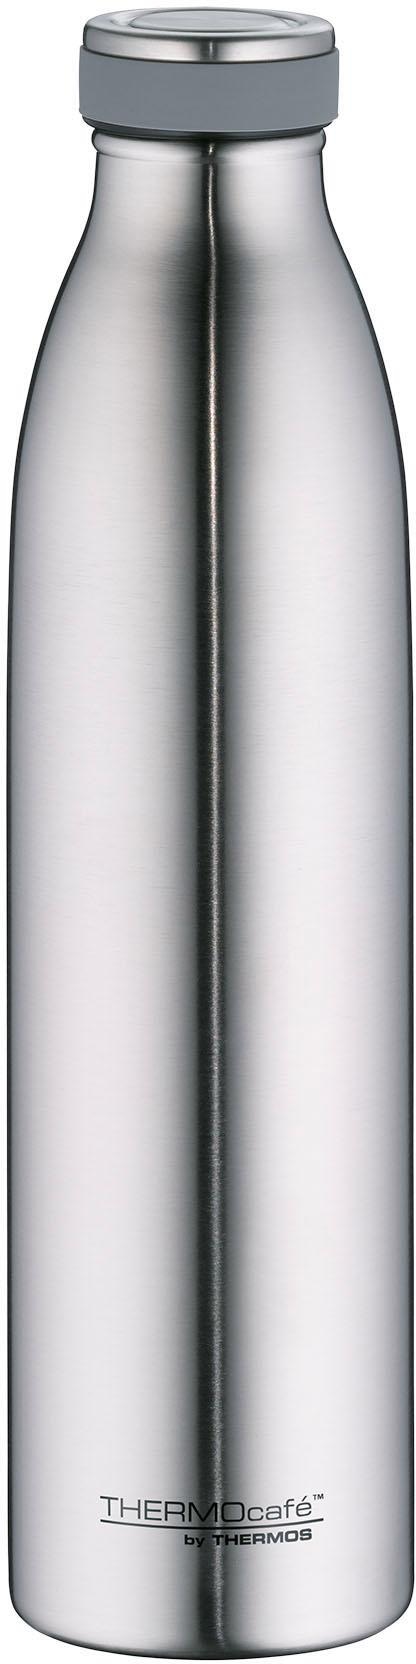 THERMOS Thermoflasche "TC Bottle", (1 tlg.), Edelstahl